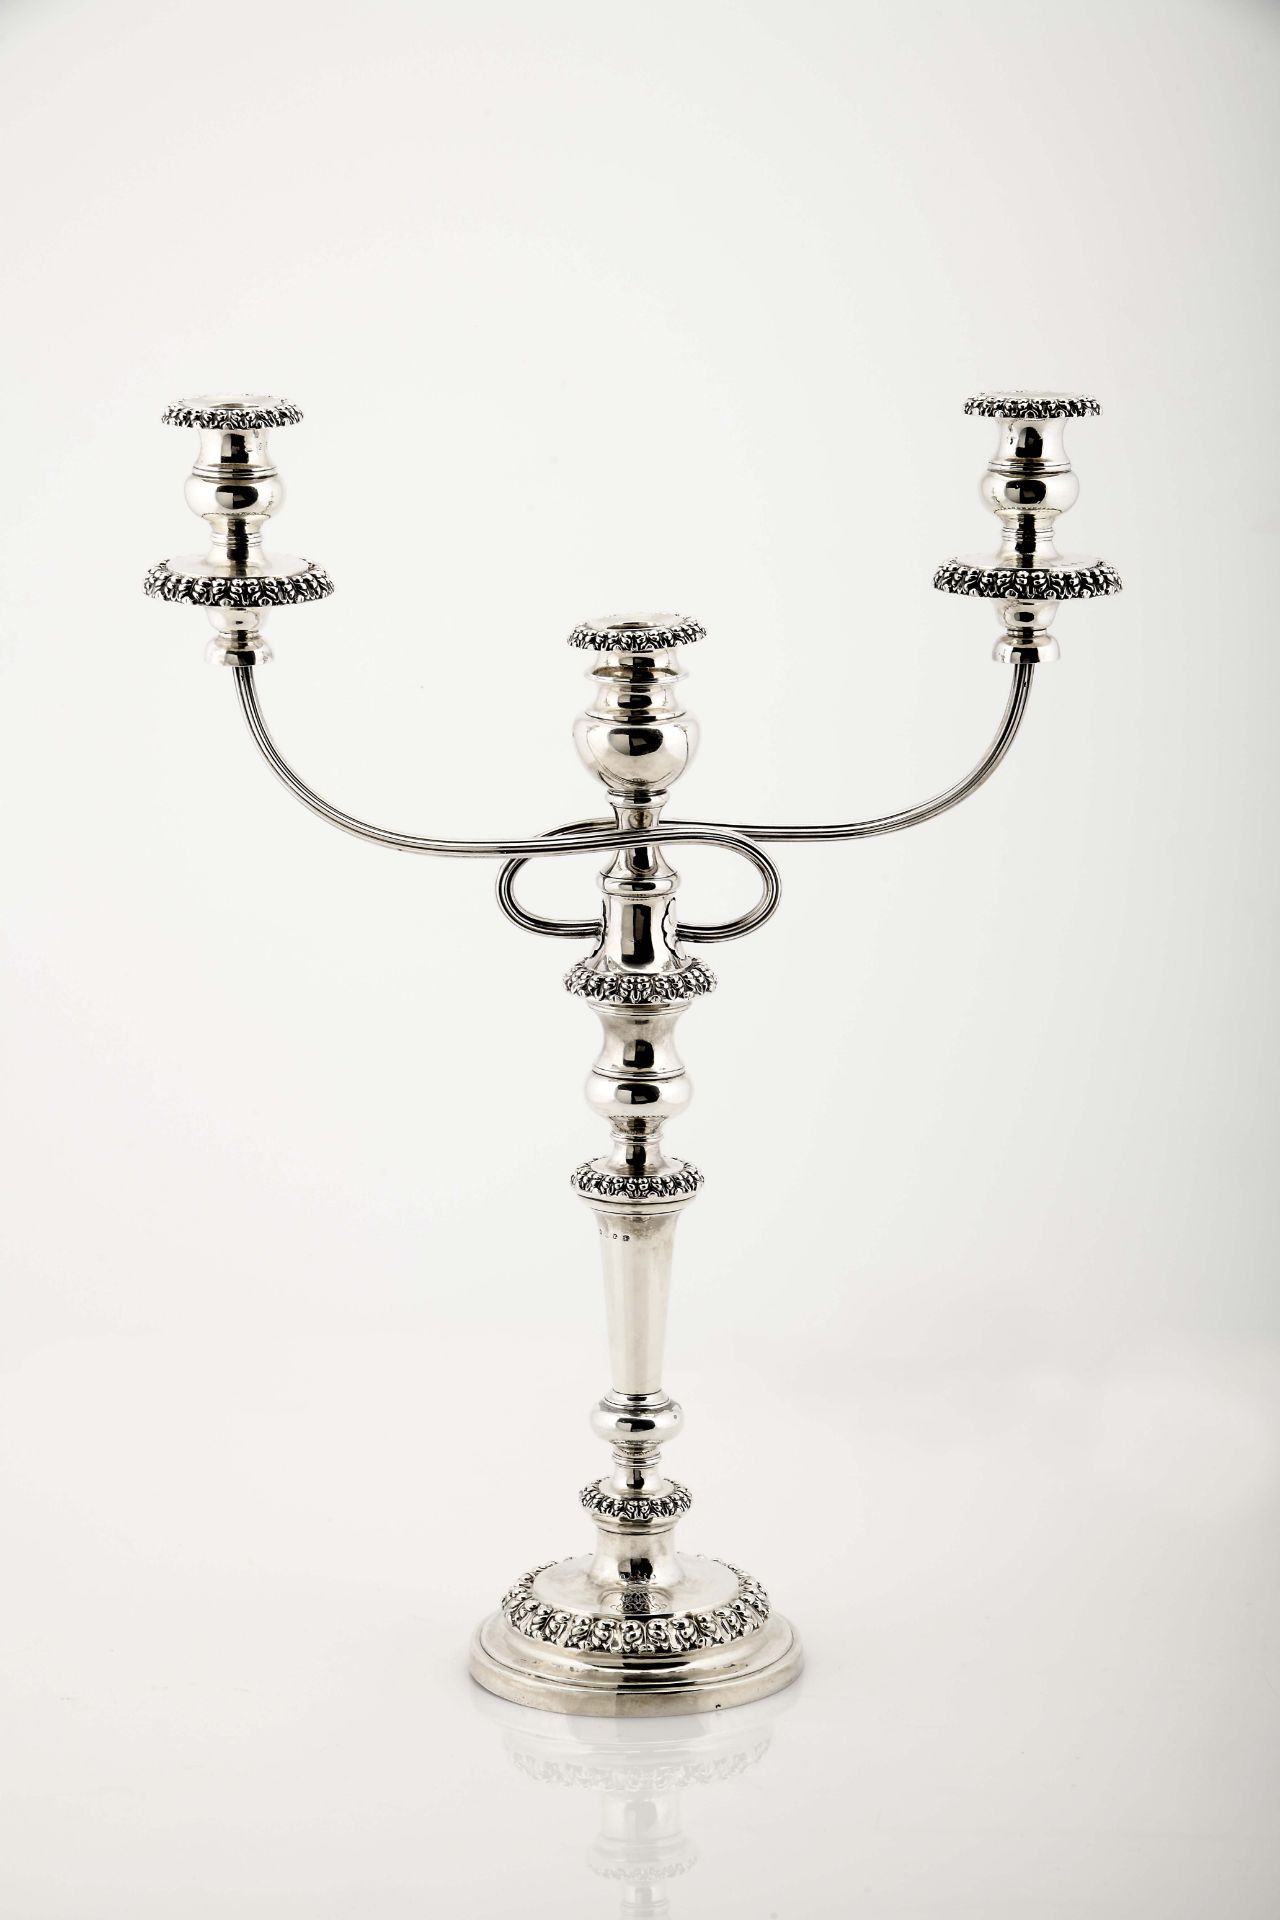 A large candlestick with a three-light serpentine